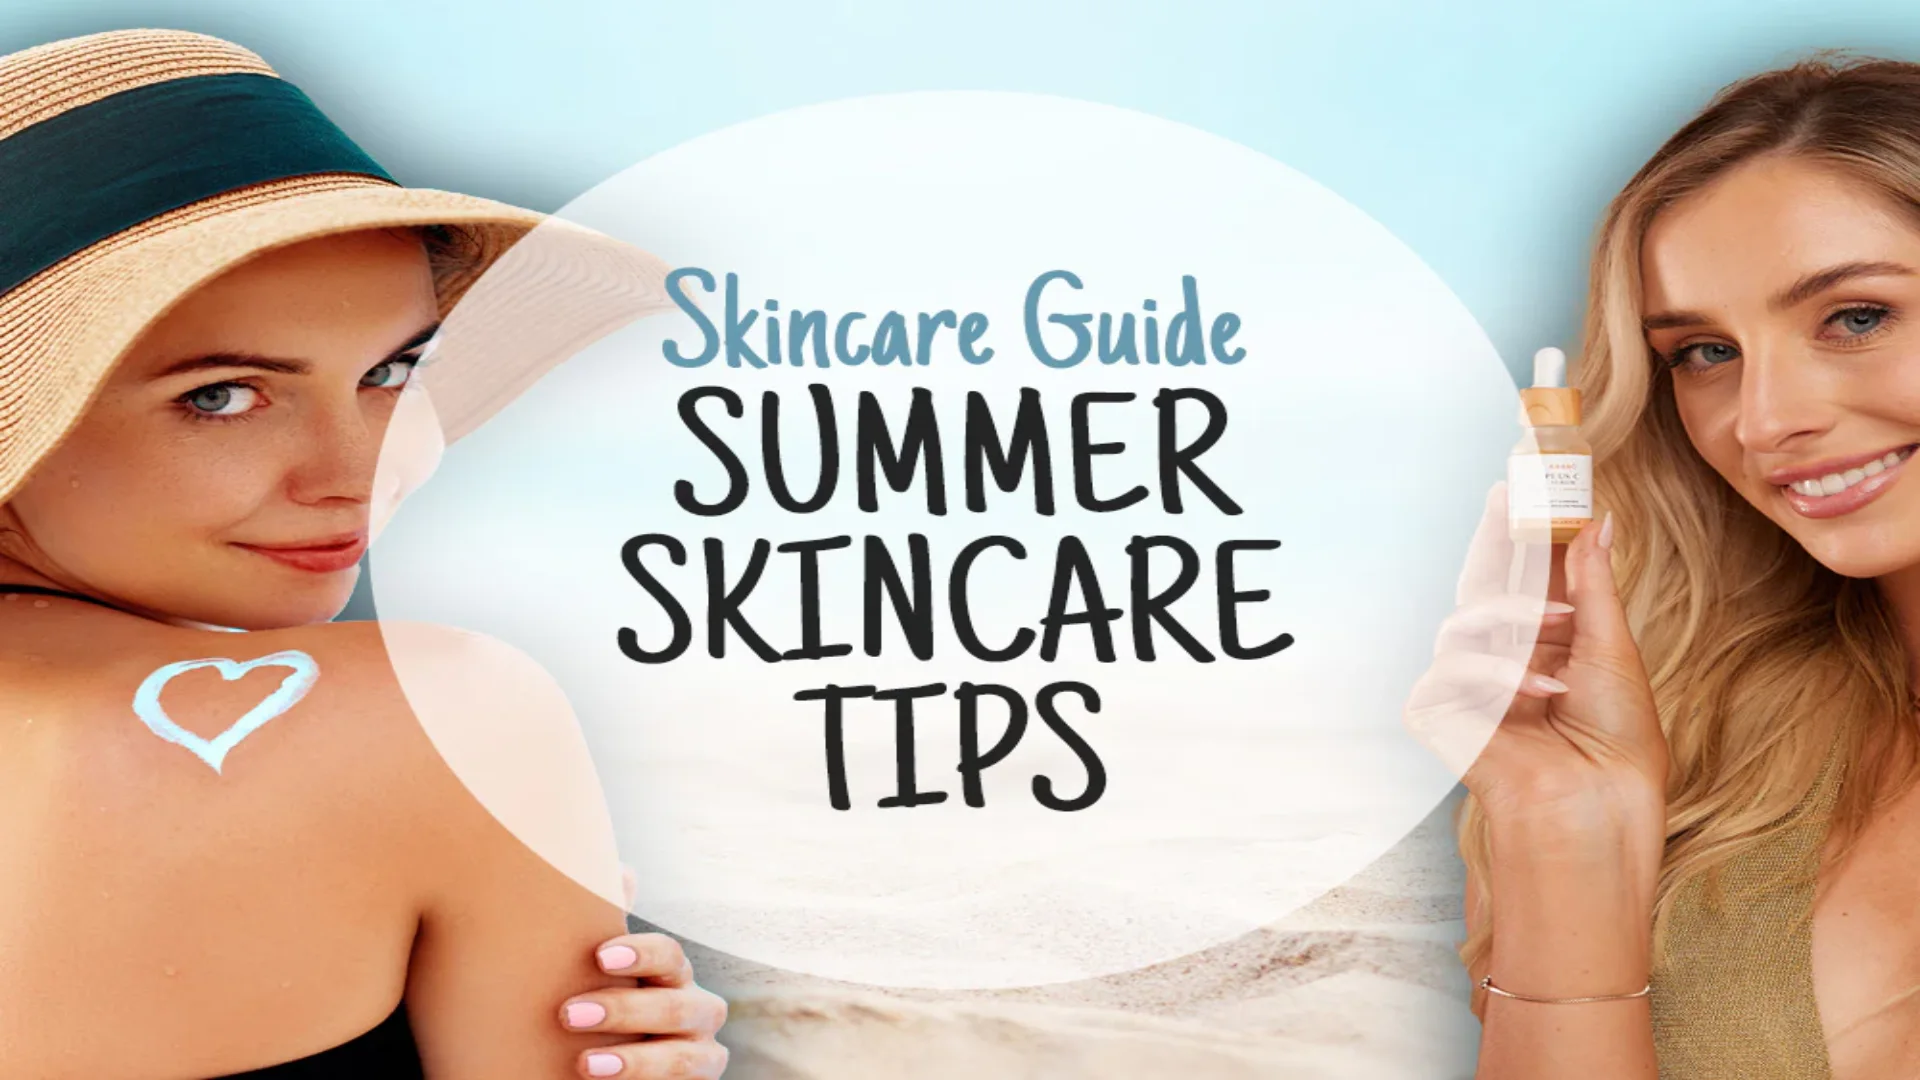 Beat the summer heat with summer skincare guide which keeps your skin healthy & glowing. Get your tips now!